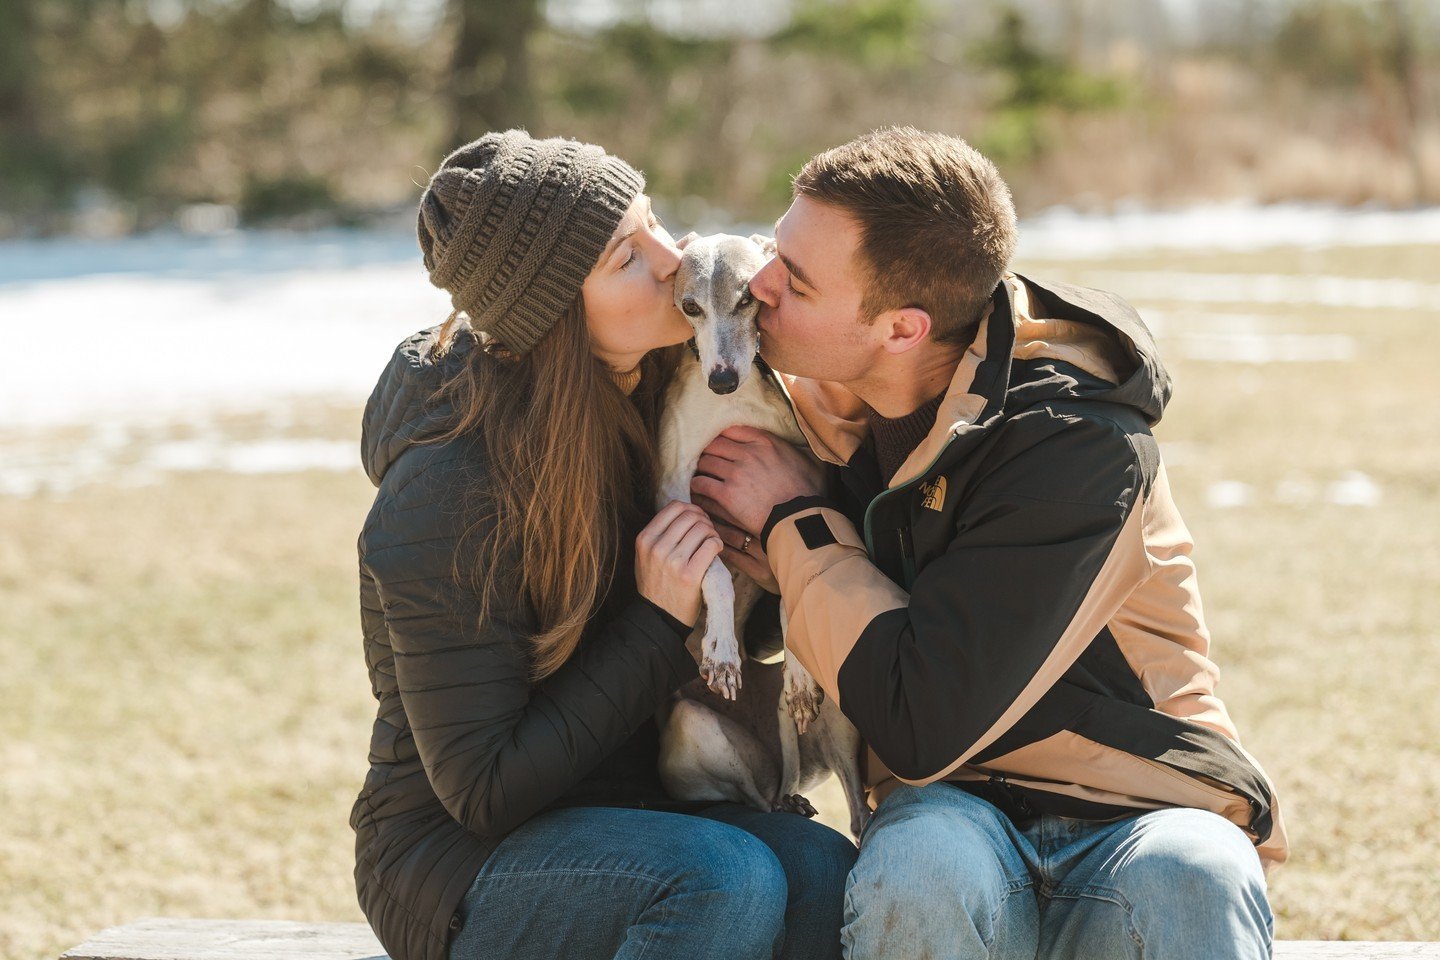 &quot;Mom! Dad! You're embarrassing me!&quot;

We love when furry family members get to star in engagement photos!

#dogsofinstagram #dogsinweddings #topweddingphotos #kwweddingphotographer #kwweddings #kwawesome

@bridalconfidential